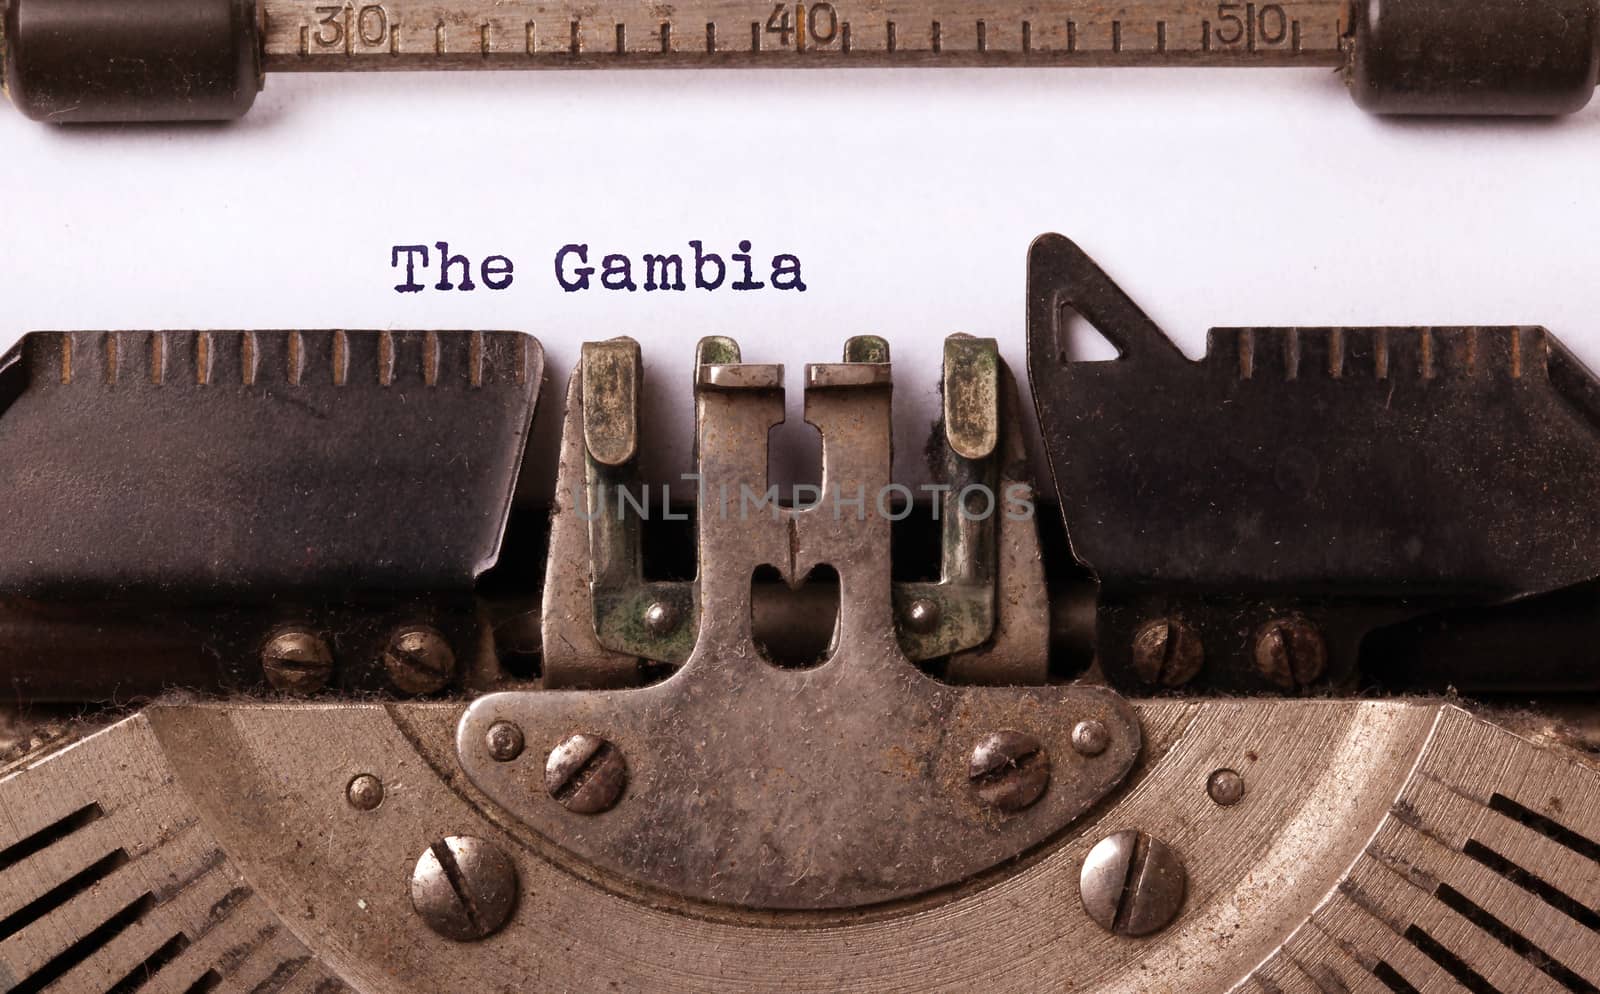 Old typewriter - The Gambia by michaklootwijk